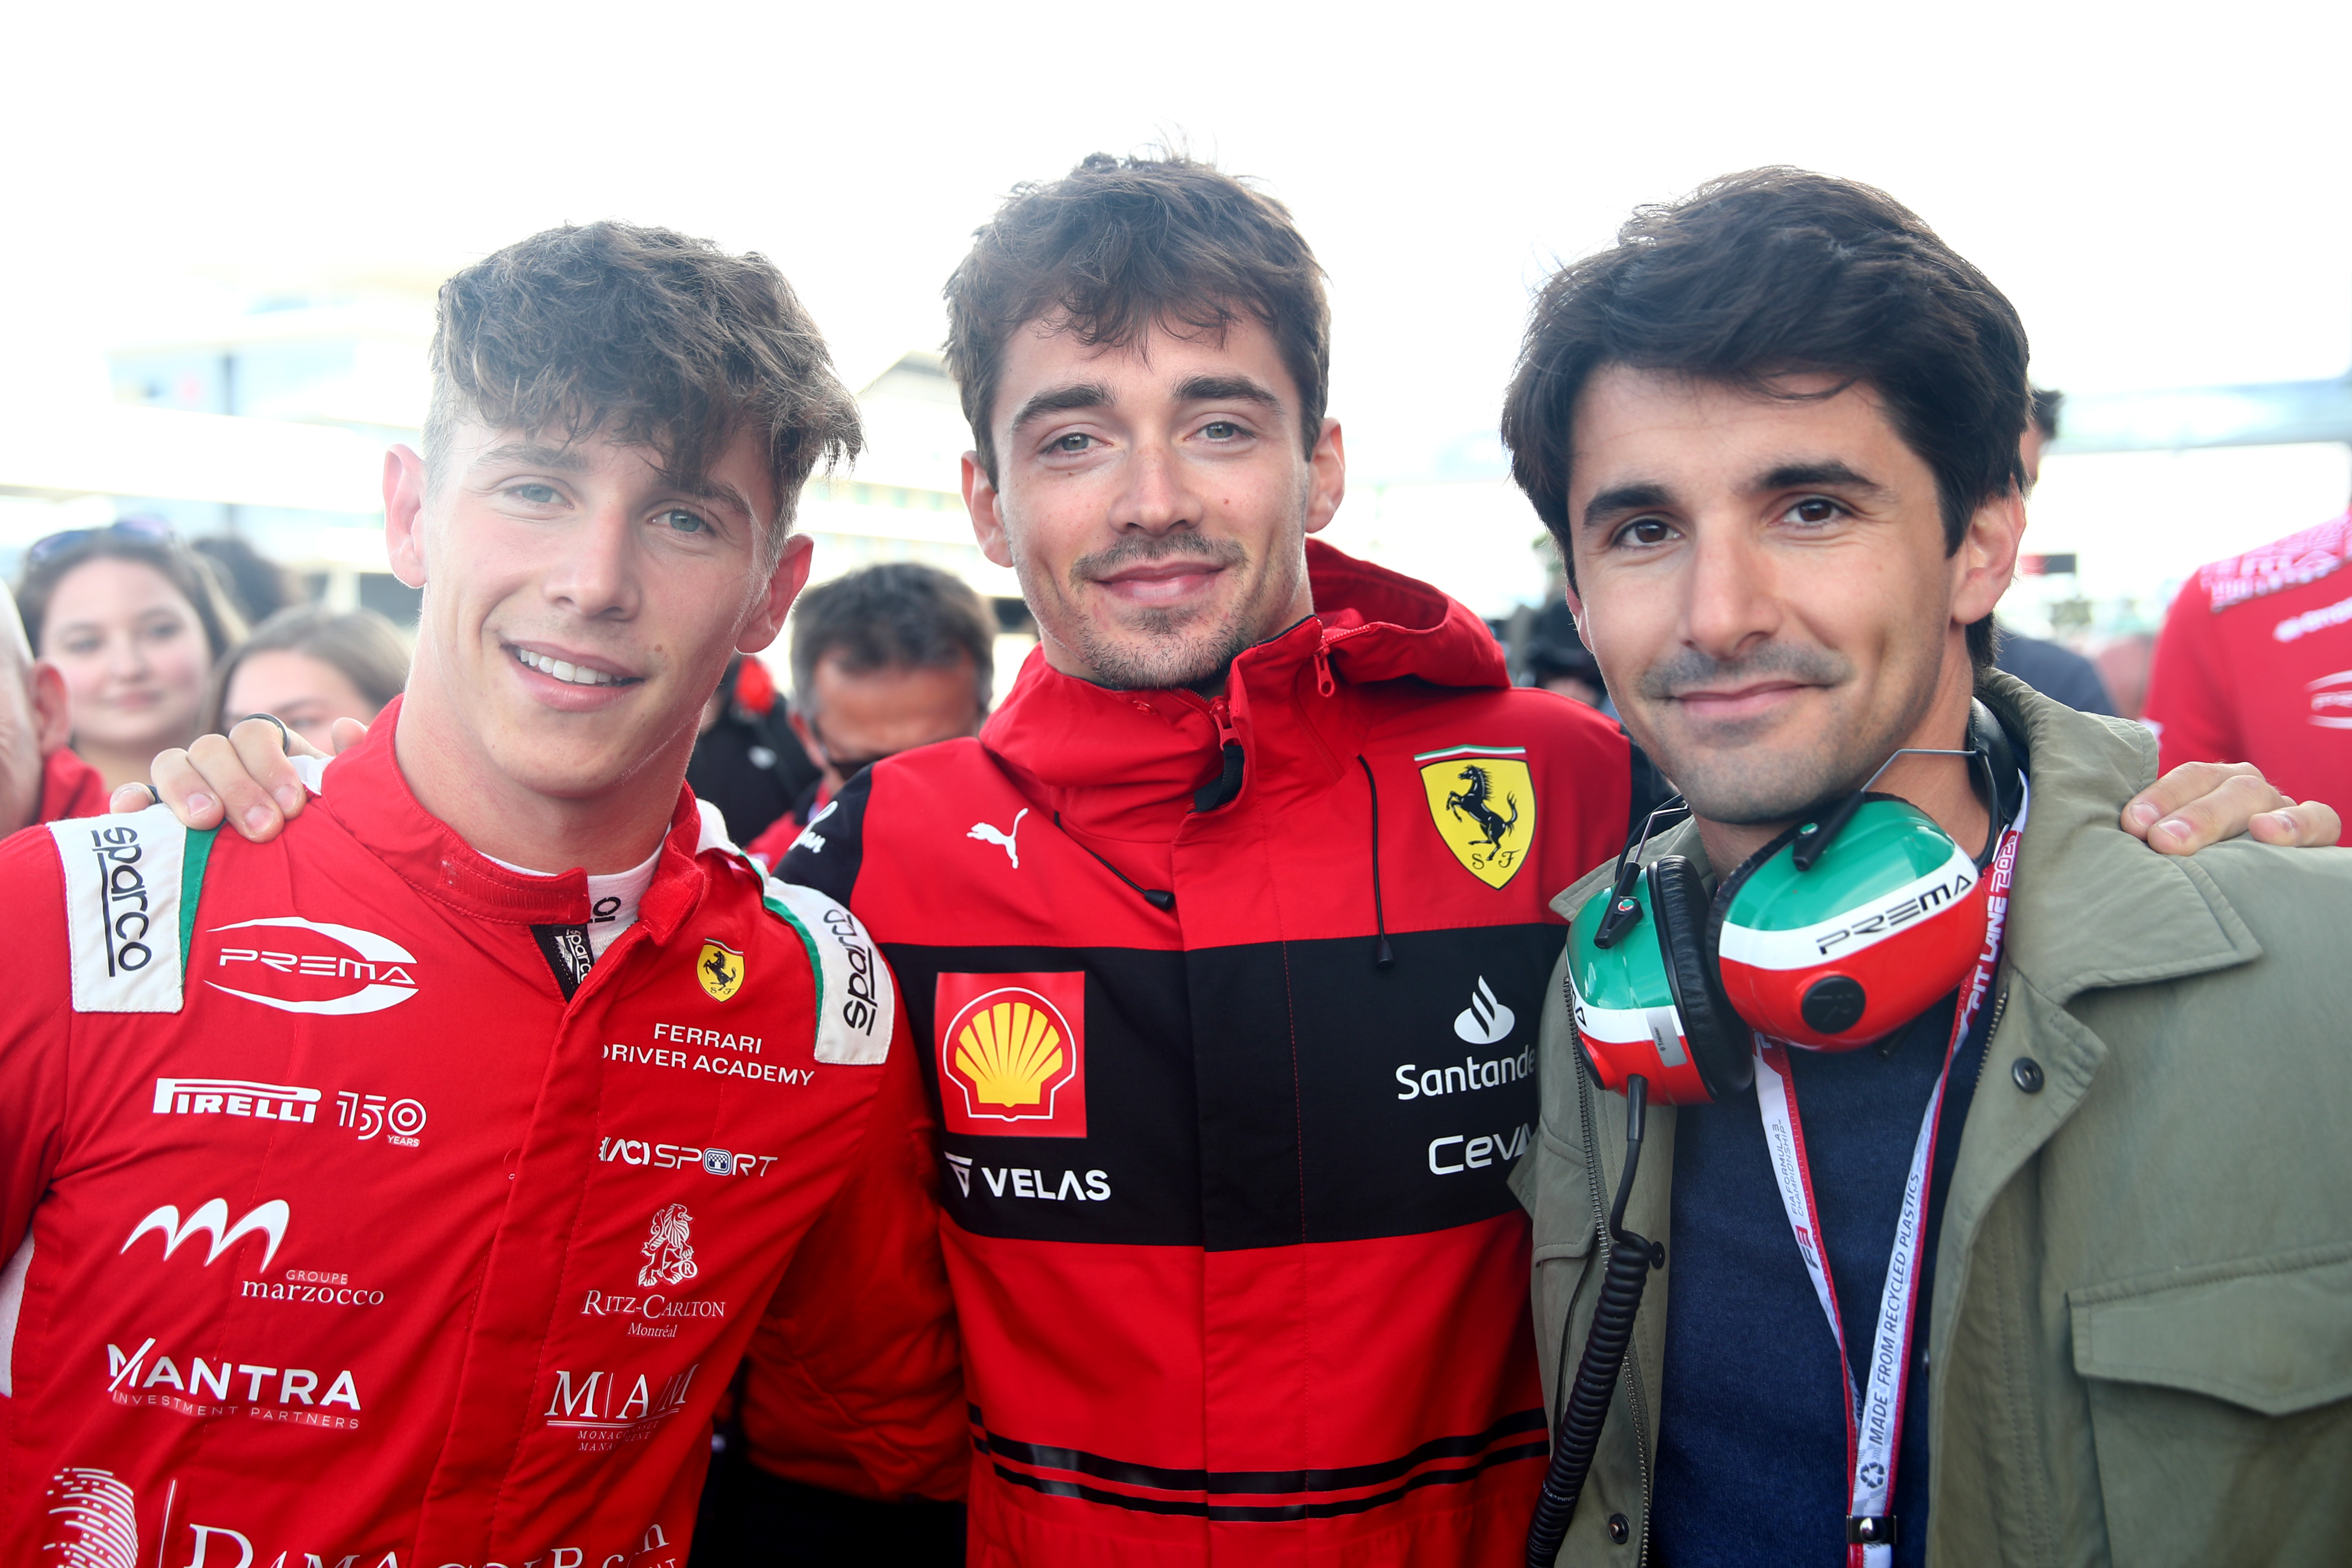 Arthur Leclerc, Charles Leclerc, and Lorenzo Leclerc following Round 4:Silverstone Feature race of the Formula 3 Championship at Silverstone, on July 3, 2022, in Northampton, England. | Source: Getty Images